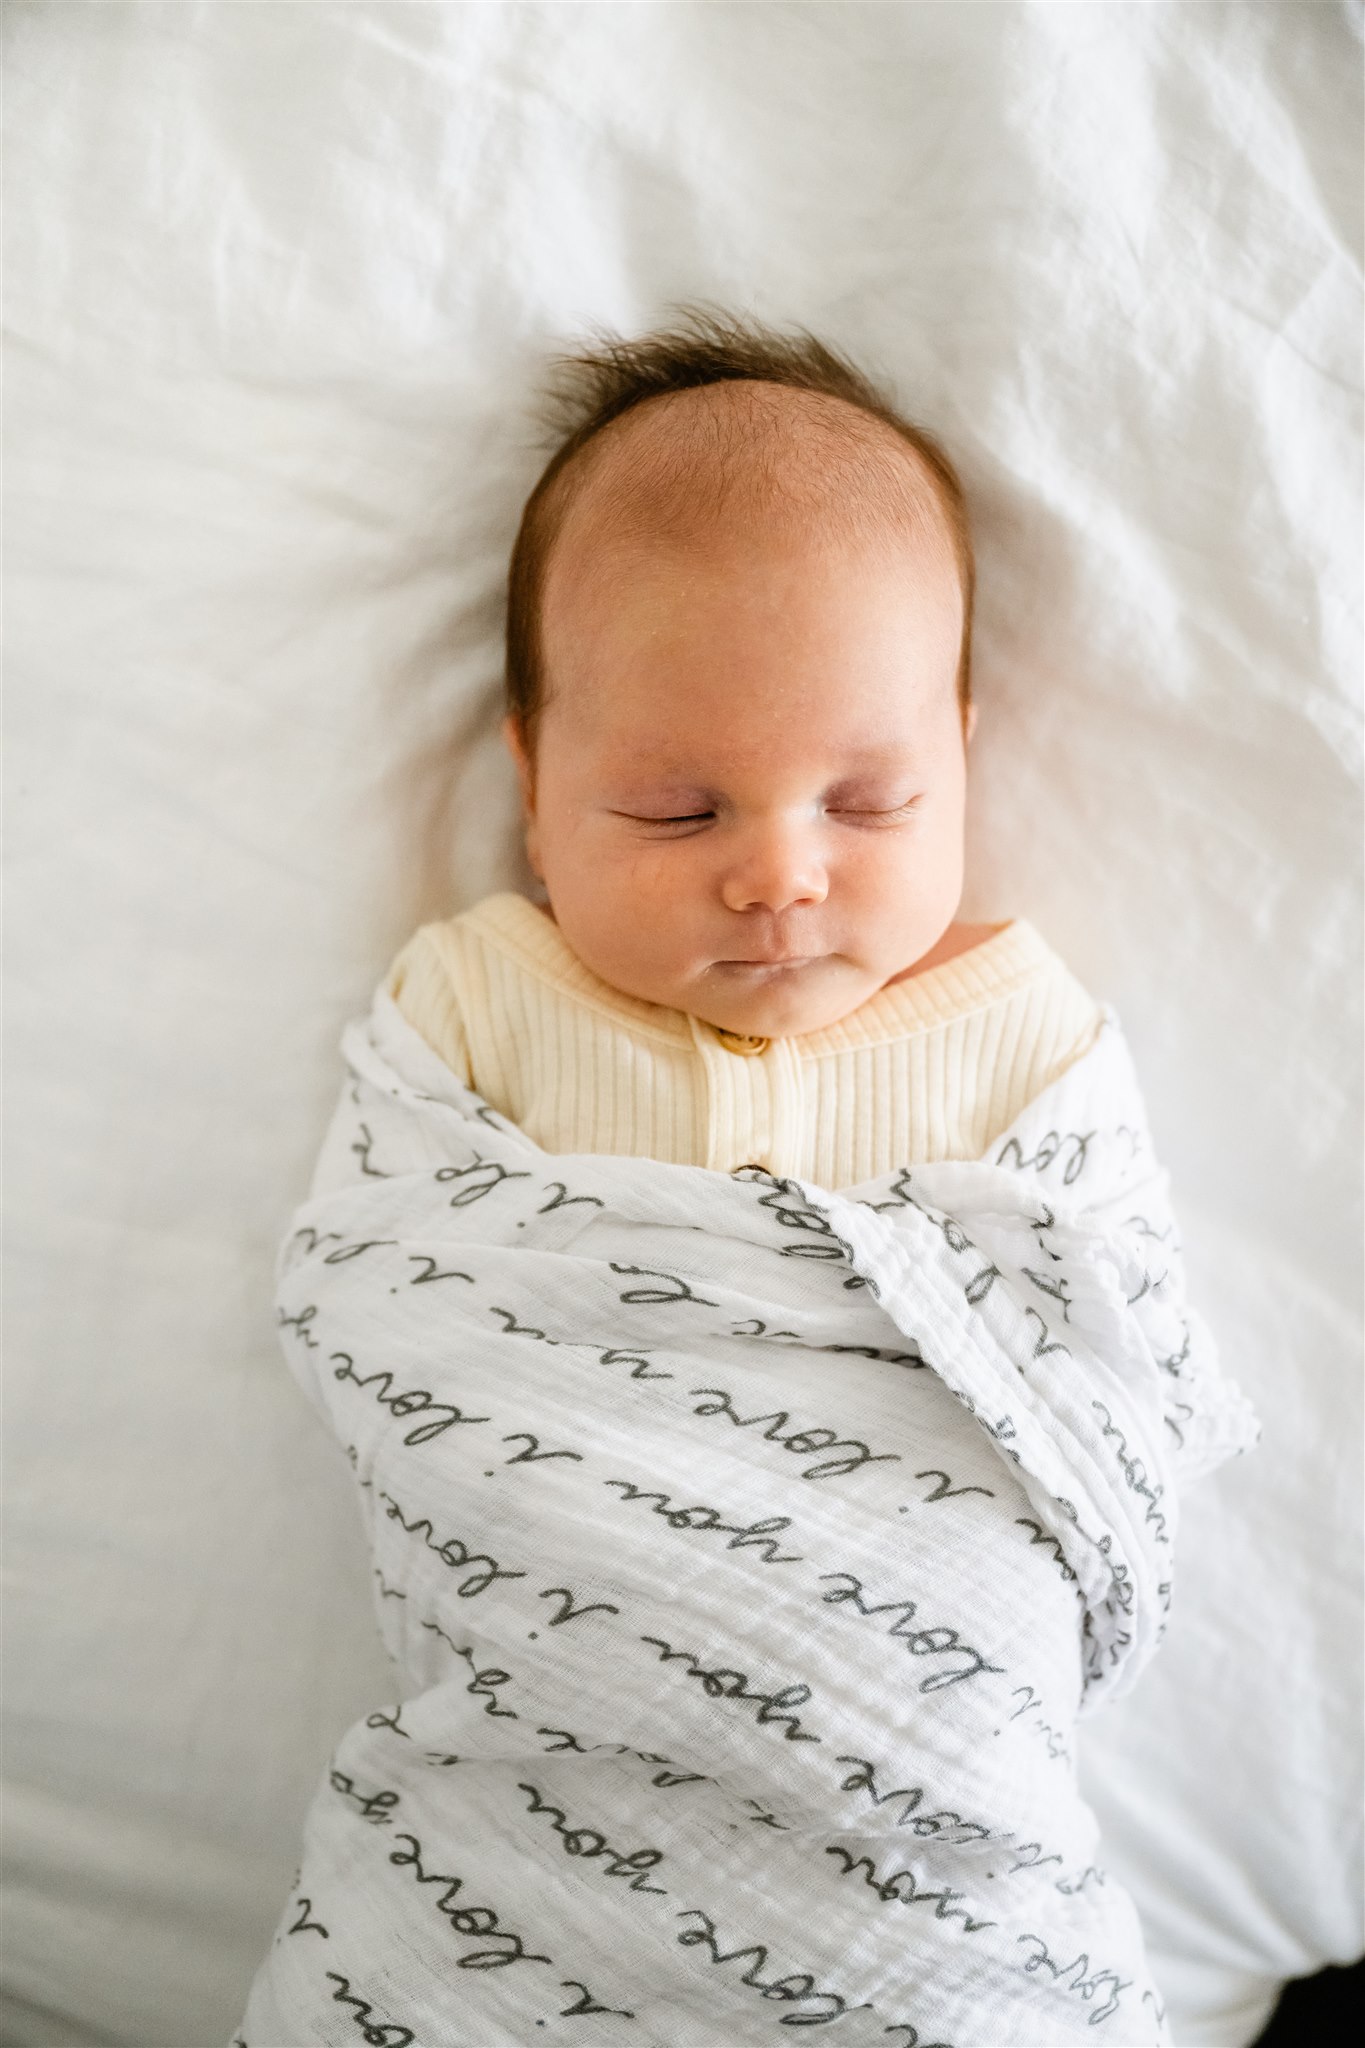 A newborn baby sleeps in a text covered swaddle on a white bed